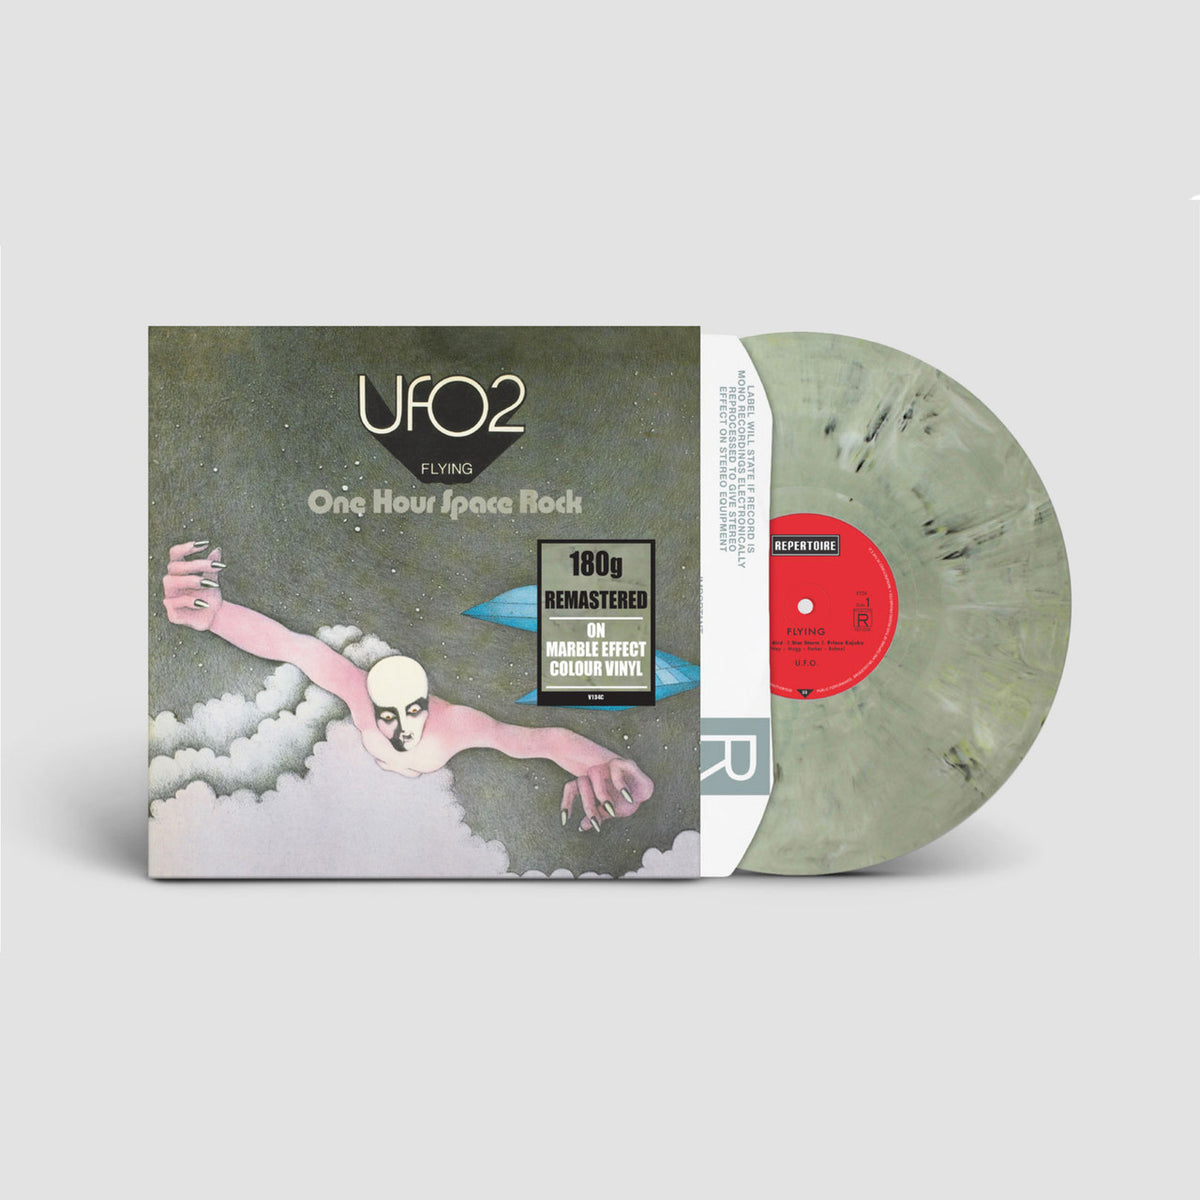 UFO - UFO 2: Flying - One Hour Space Rock LP (Half-Speed Mastered 180g Import LP, Marble Effect Color Vinyl)